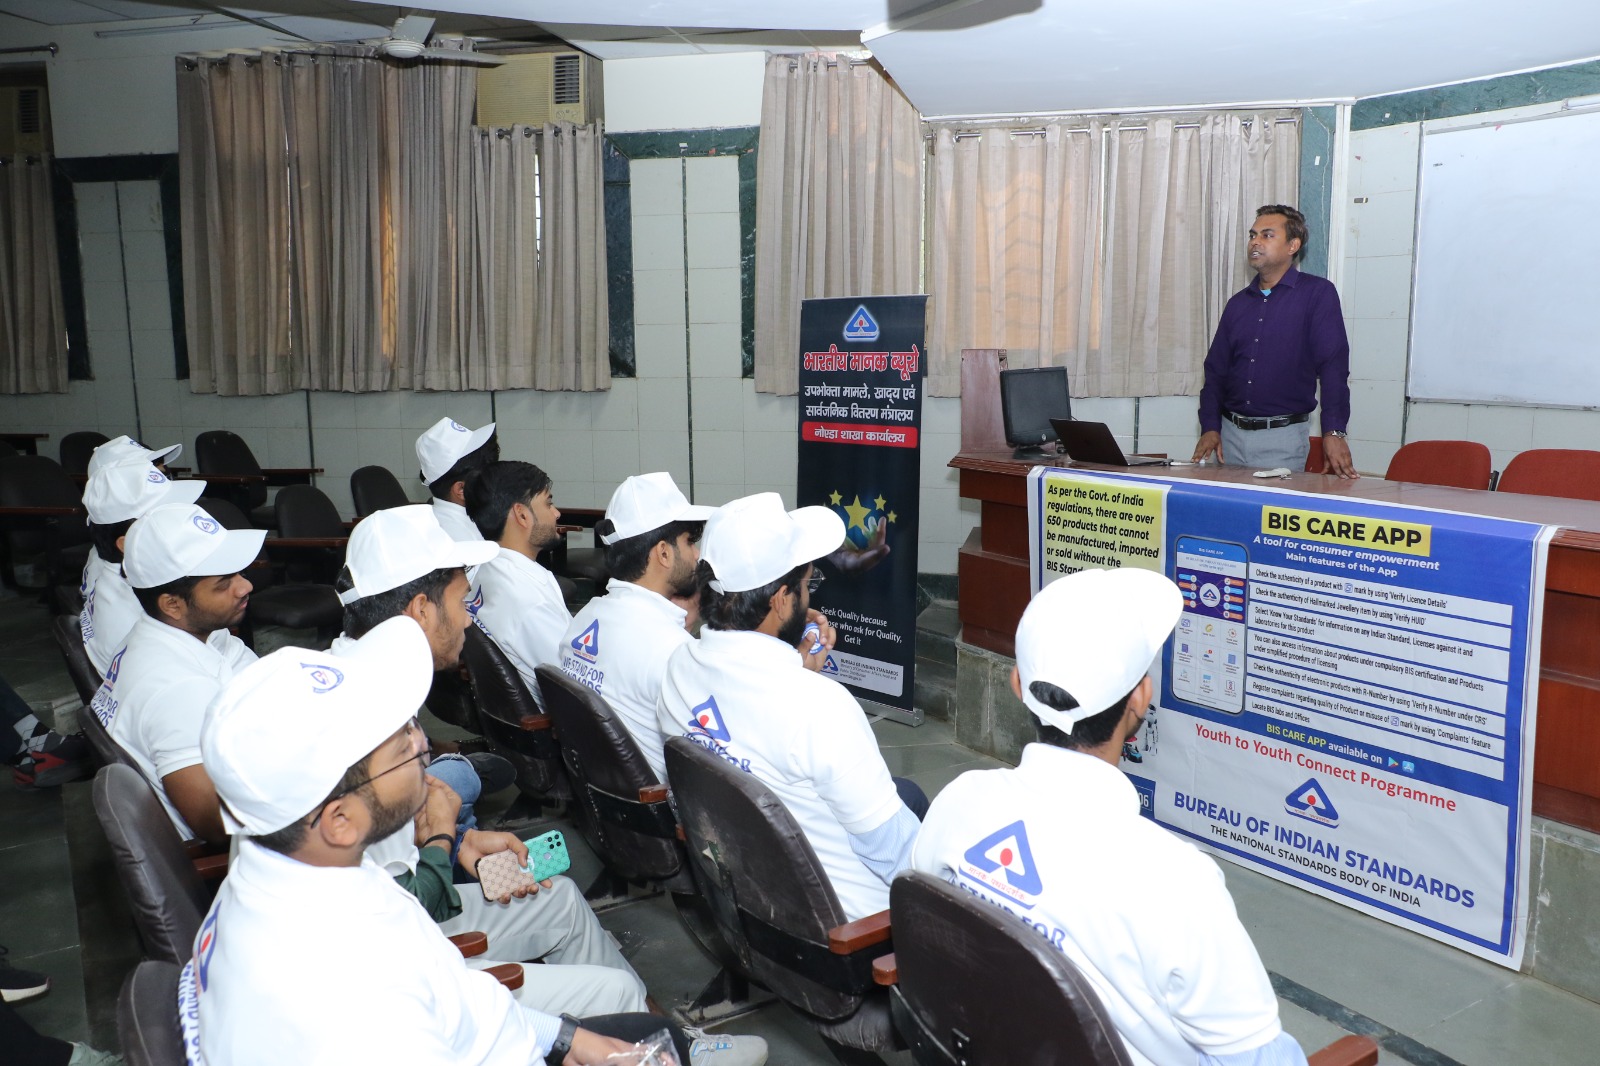 Youth to Youth Connect Programme conducted by Bureau of Indian Standards - Sharda University Agra